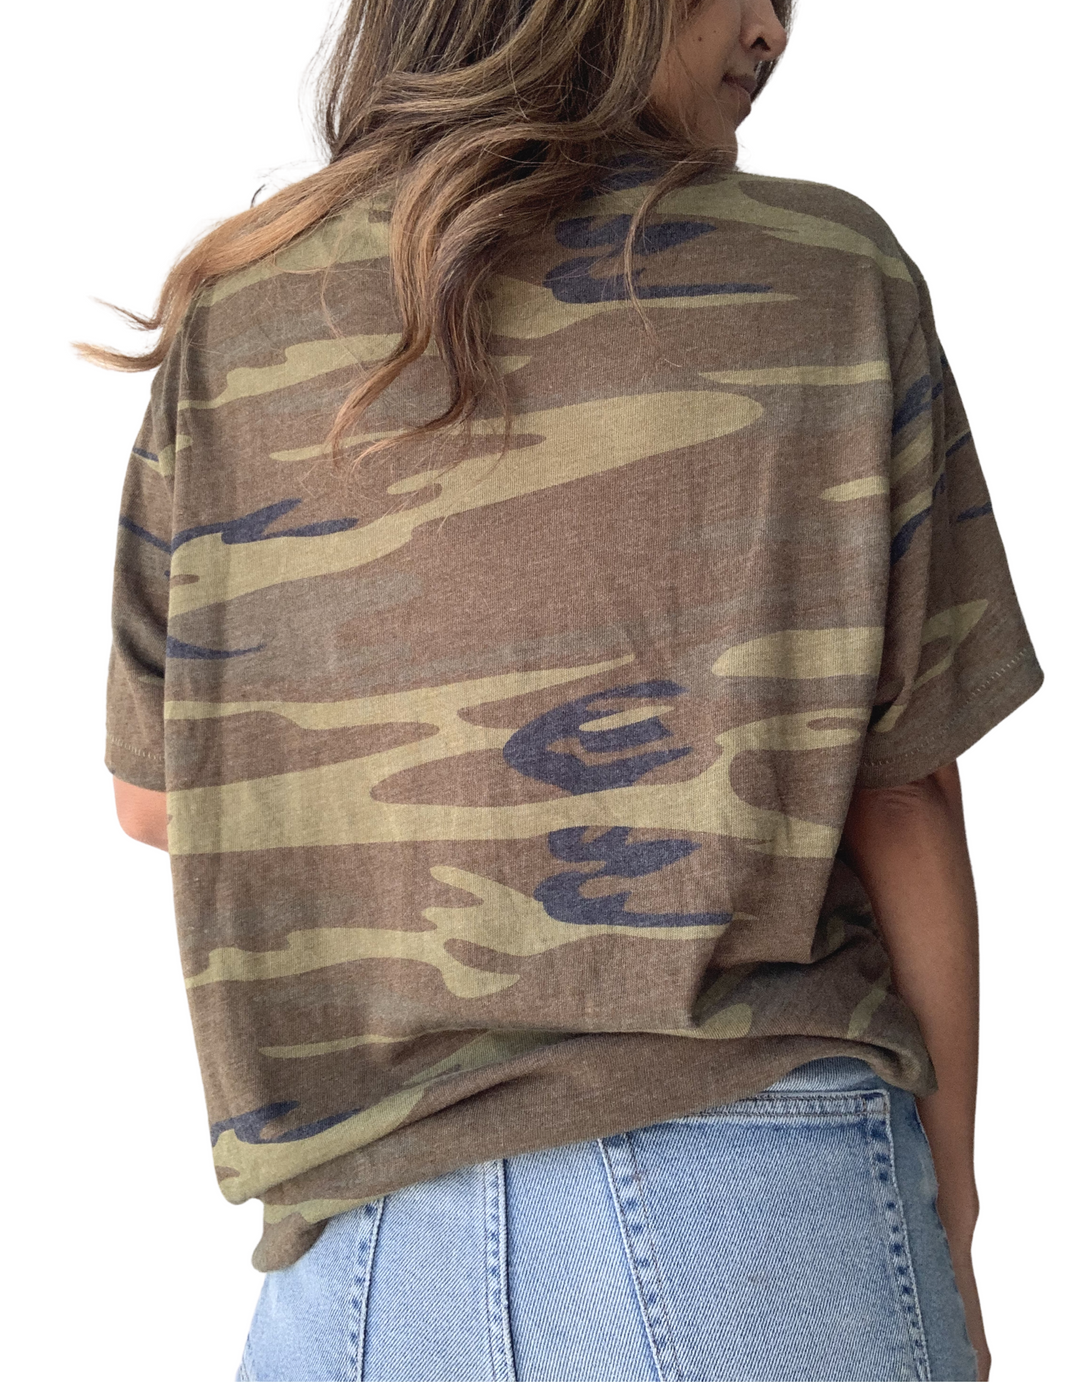 TIGER CAMO TEE - Kingfisher Road - Online Boutique